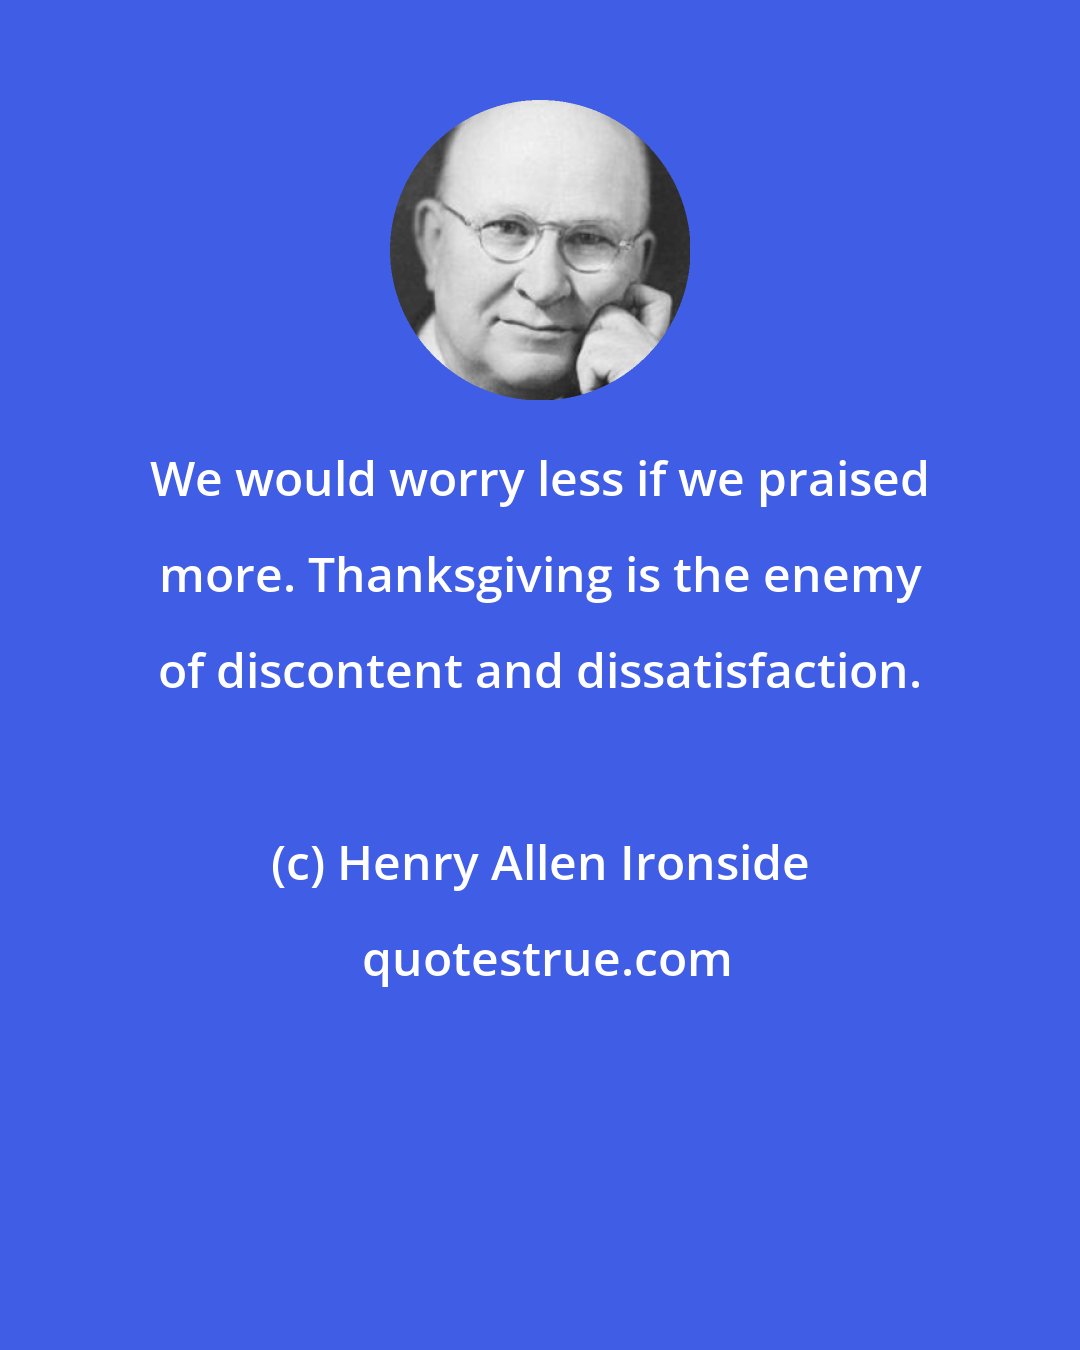 Henry Allen Ironside: We would worry less if we praised more. Thanksgiving is the enemy of discontent and dissatisfaction.